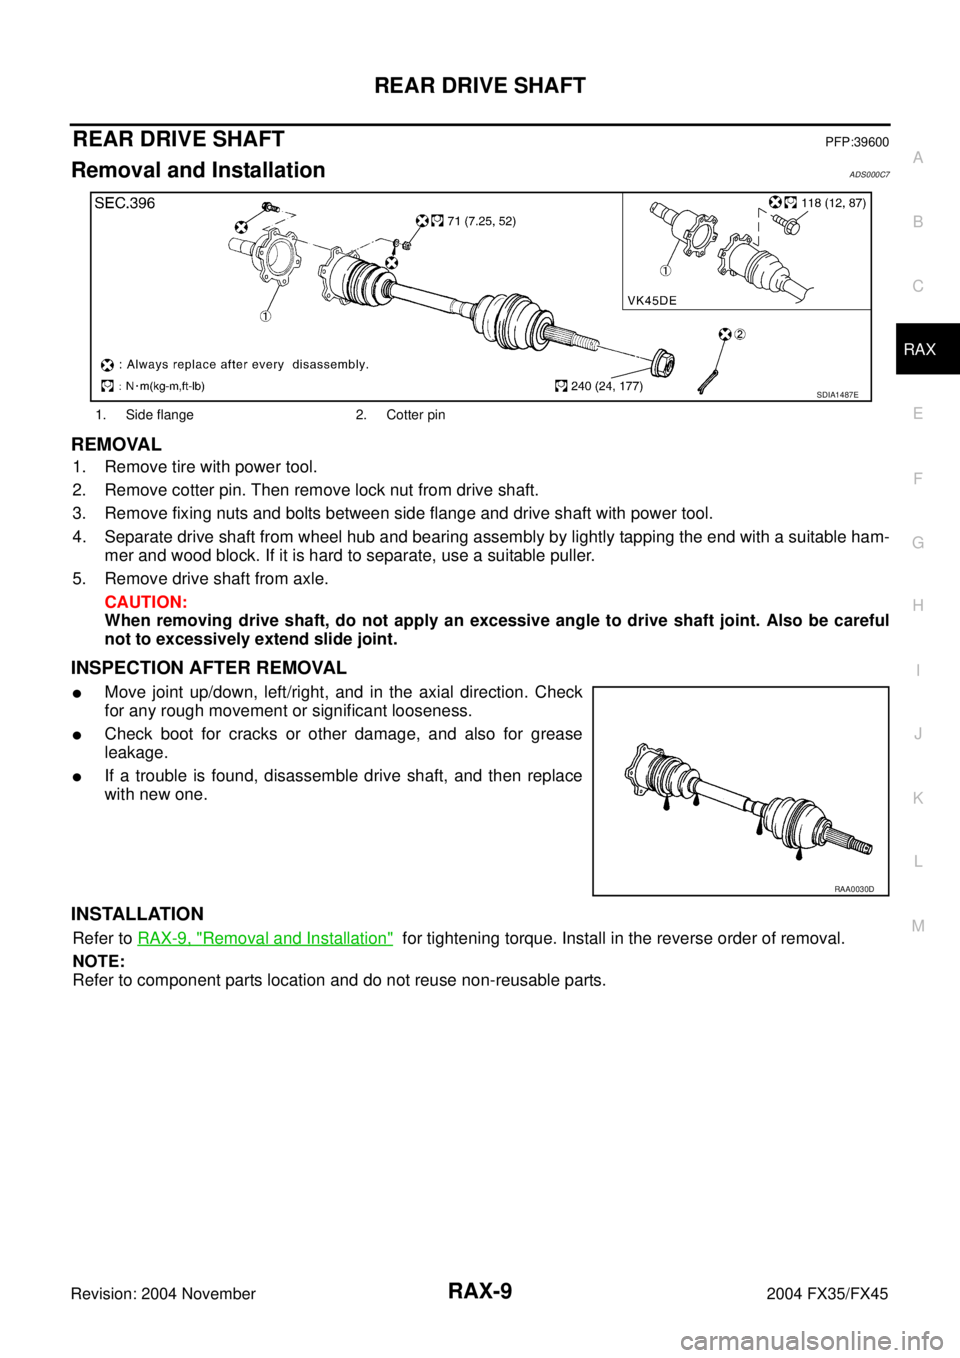 INFINITI FX35 2004  Service Manual REAR DRIVE SHAFT
RAX-9
C
E
F
G
H
I
J
K
L
MA
B
RAX
Revision: 2004 November 2004 FX35/FX45
REAR DRIVE SHAFTPFP:39600
Removal and InstallationADS000C7
REMOVAL
1. Remove tire with power tool.
2. Remove co